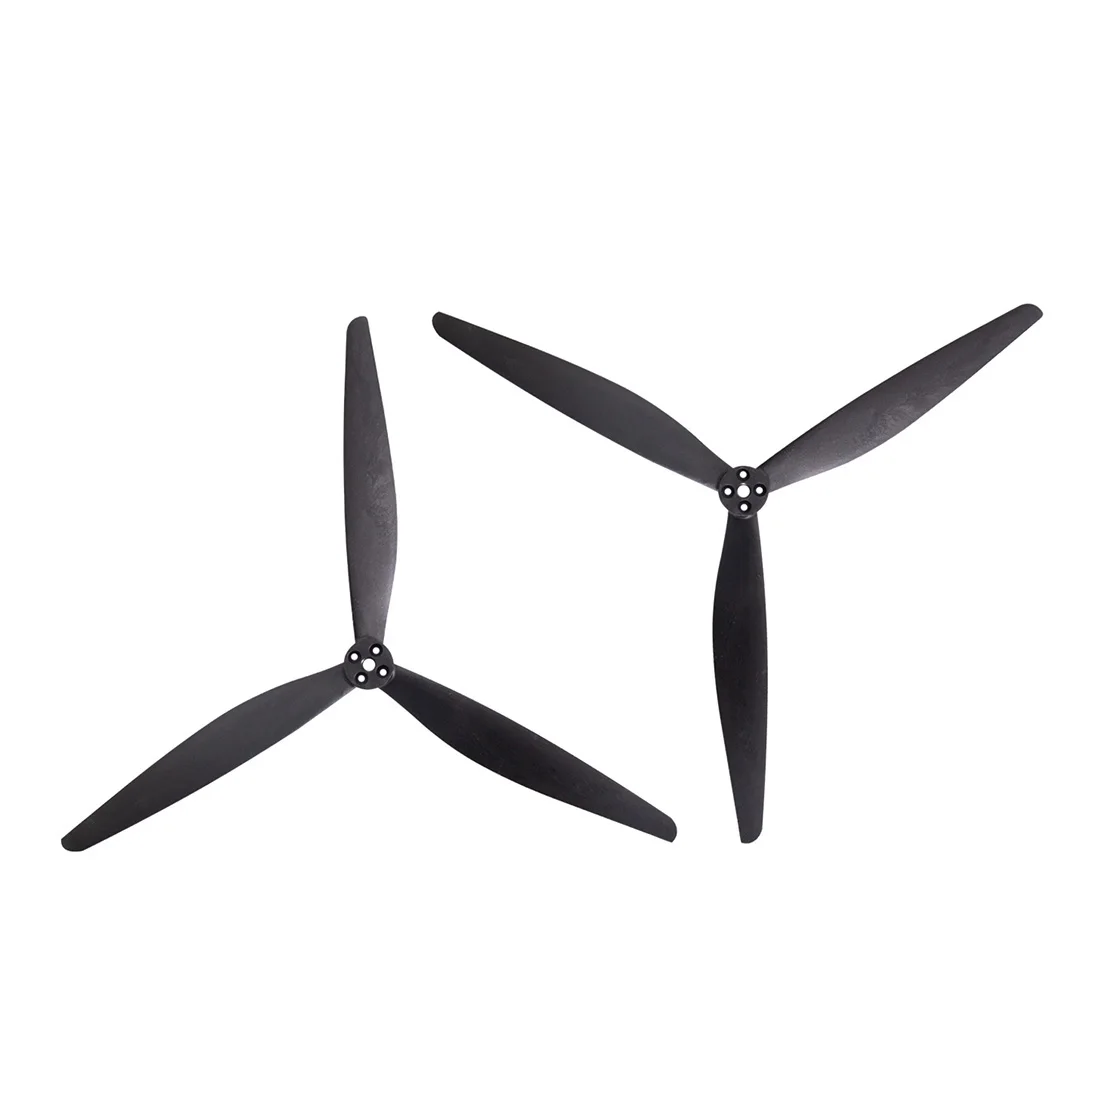 

2Pairs GEMFAN X-CLASS 1308 High Efficiency Propeller 13inch 3 Paddle CW CCW 0.8inch Pitch Props for RC FPV Drone